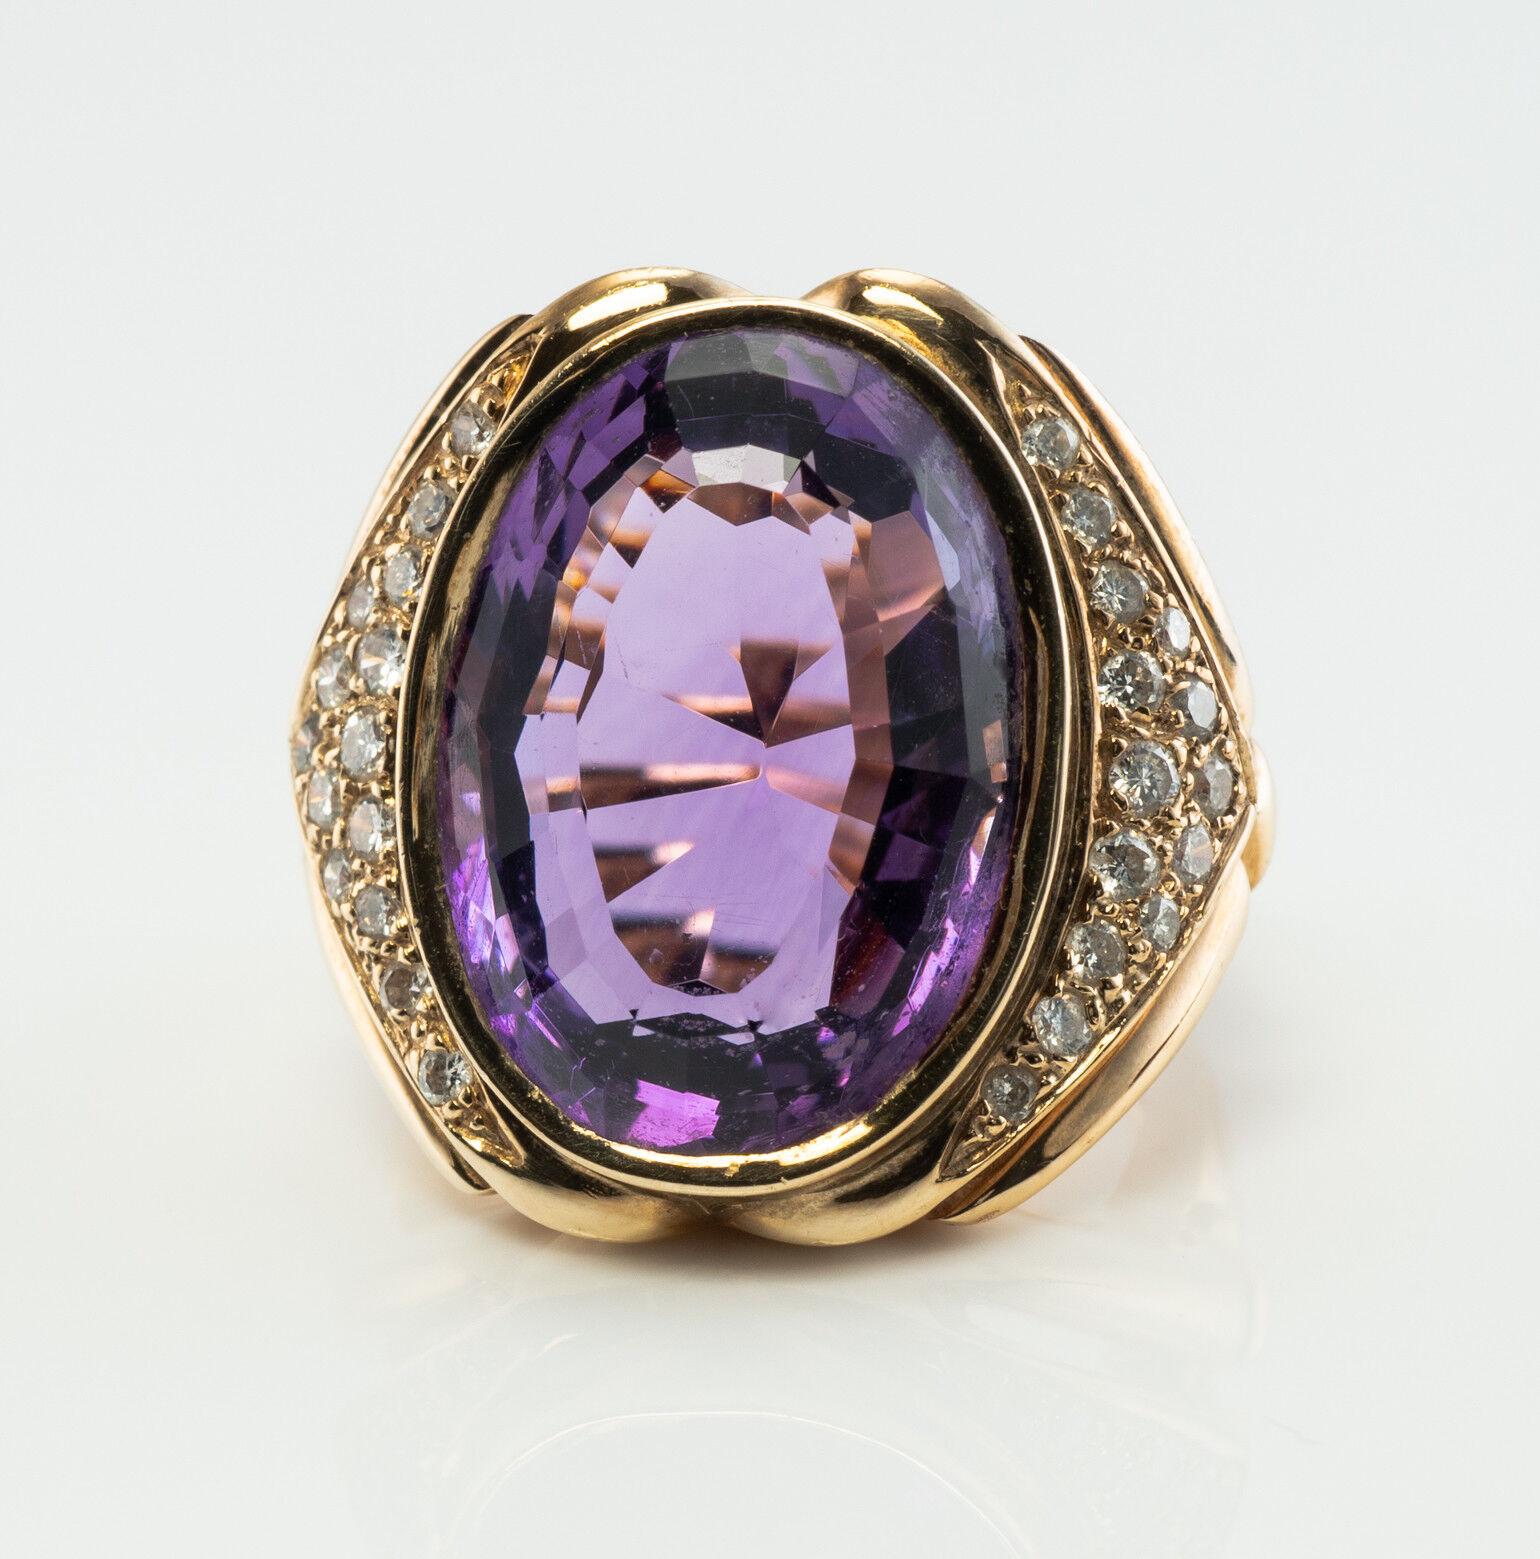 This stunning vintage ring is finely crafted in solid 14K Yellow Gold (carefully tested and guaranteed) and set with genuine Earth mined Amethyst and Diamonds. The center oval cut gem measures 18mm x 13mm (14.00 carats!) and this is a very clean and